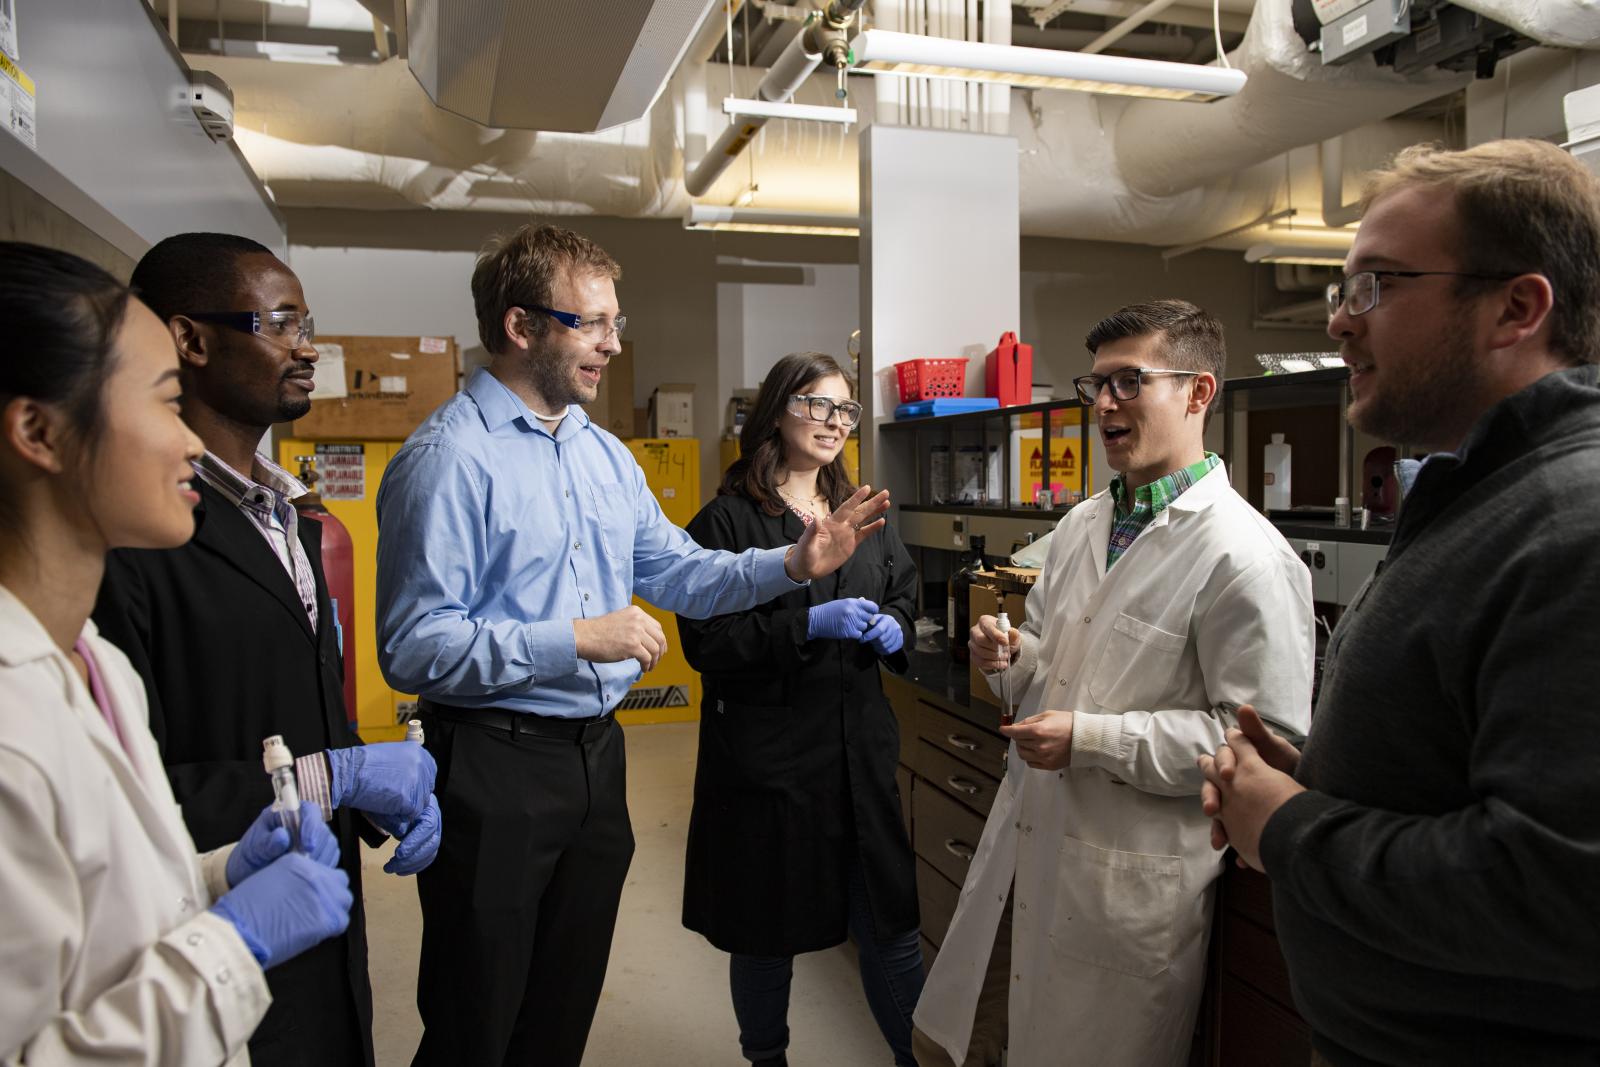 Dr. Jared Delcamp in discussion with his lab students